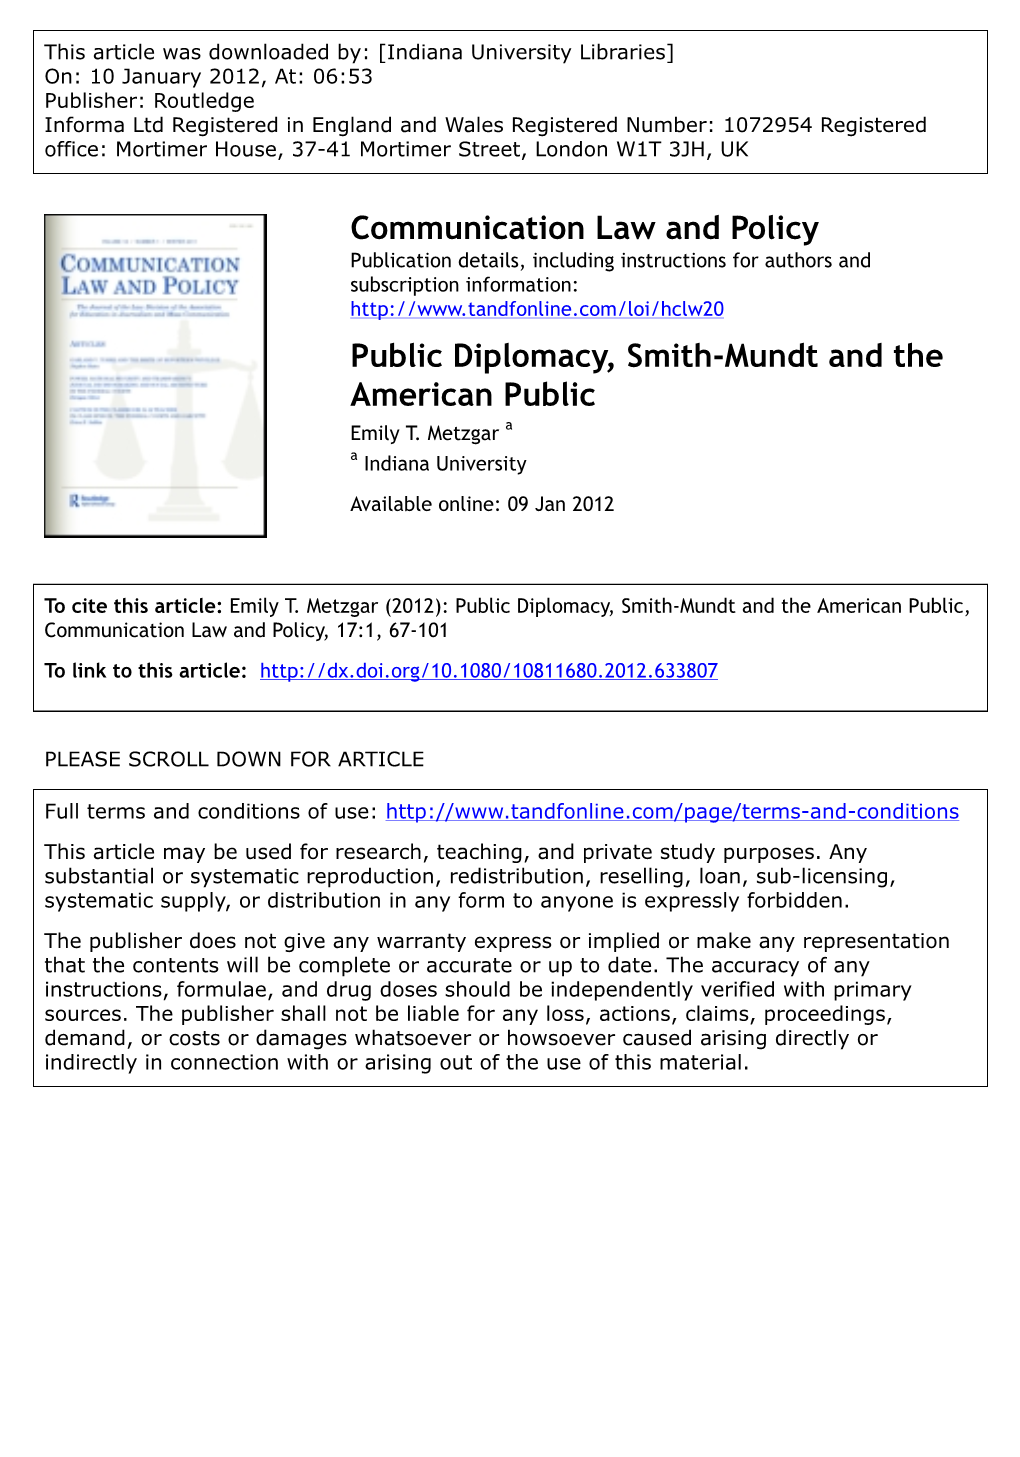 Smith-Mundt and the American Public Emily T